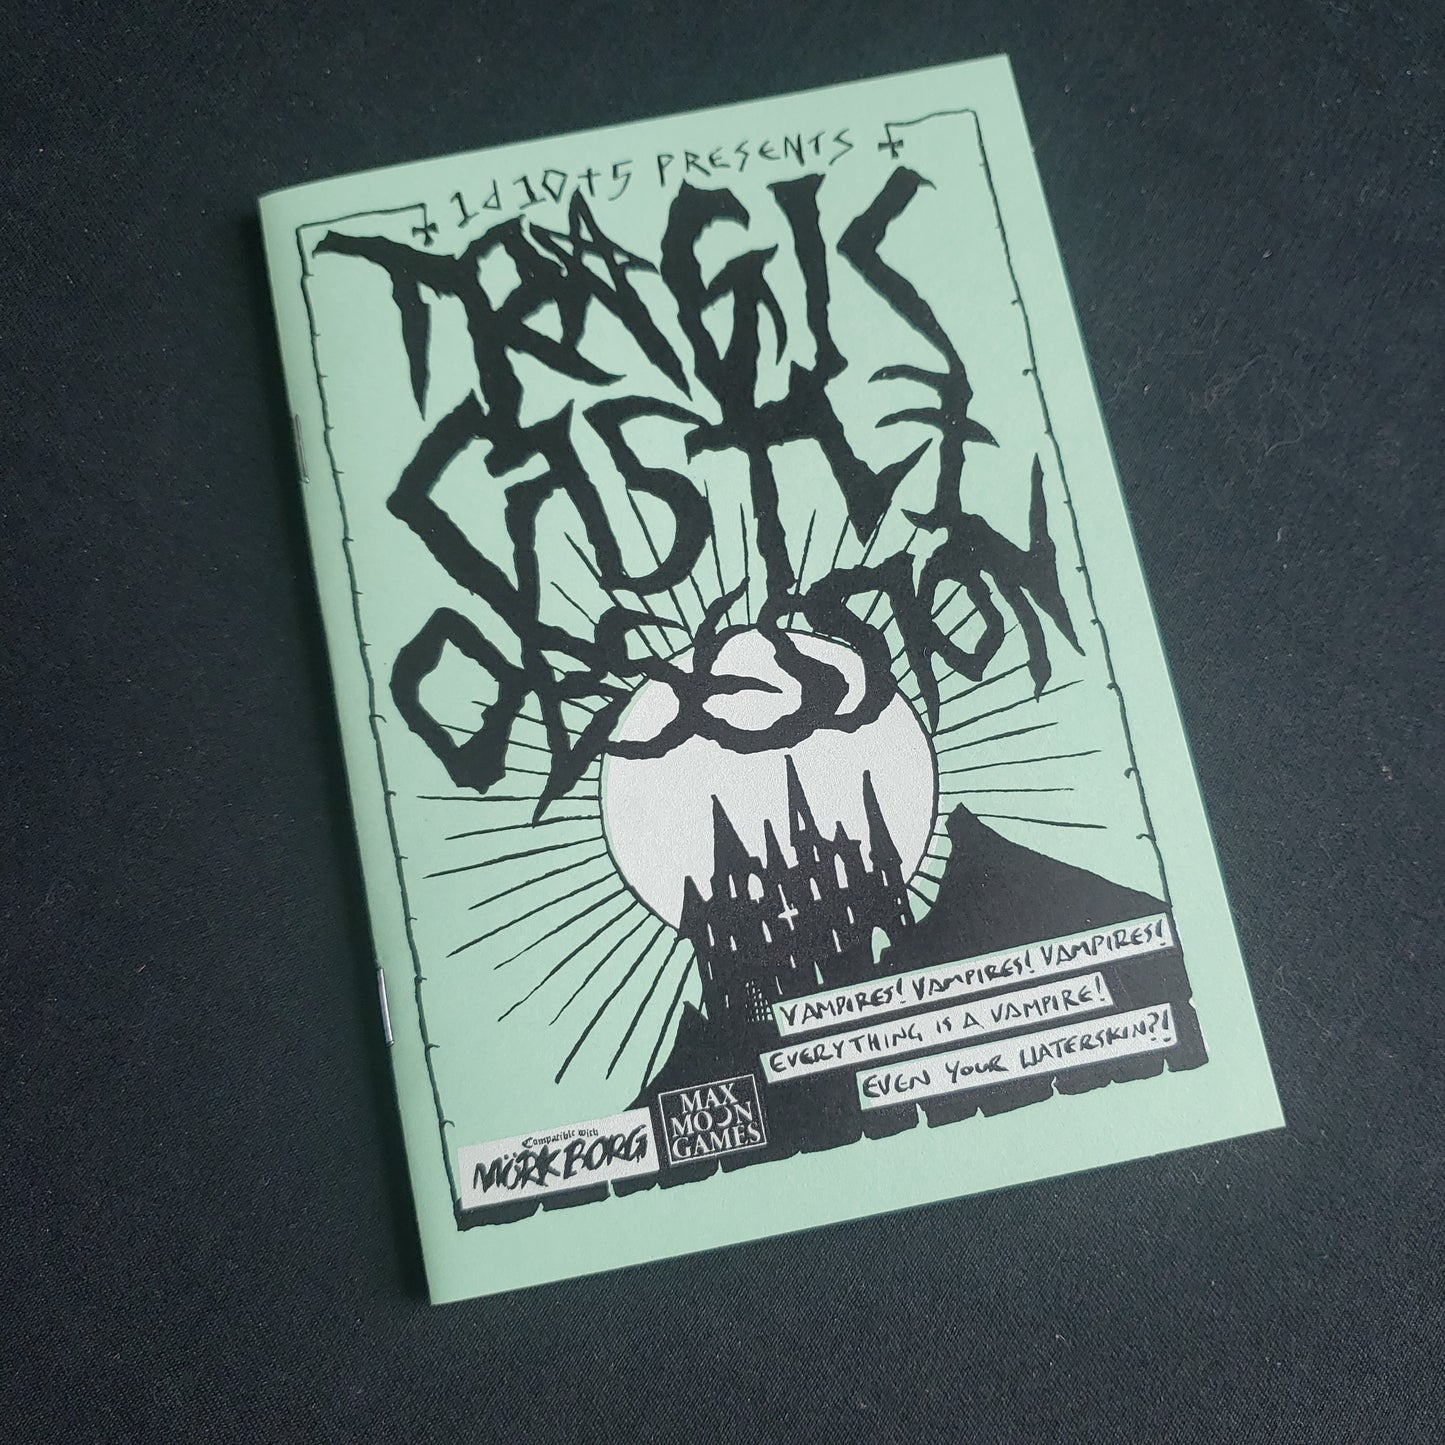 Image shows the front cover of the Tragic Castle Obsession roleplaying game zine